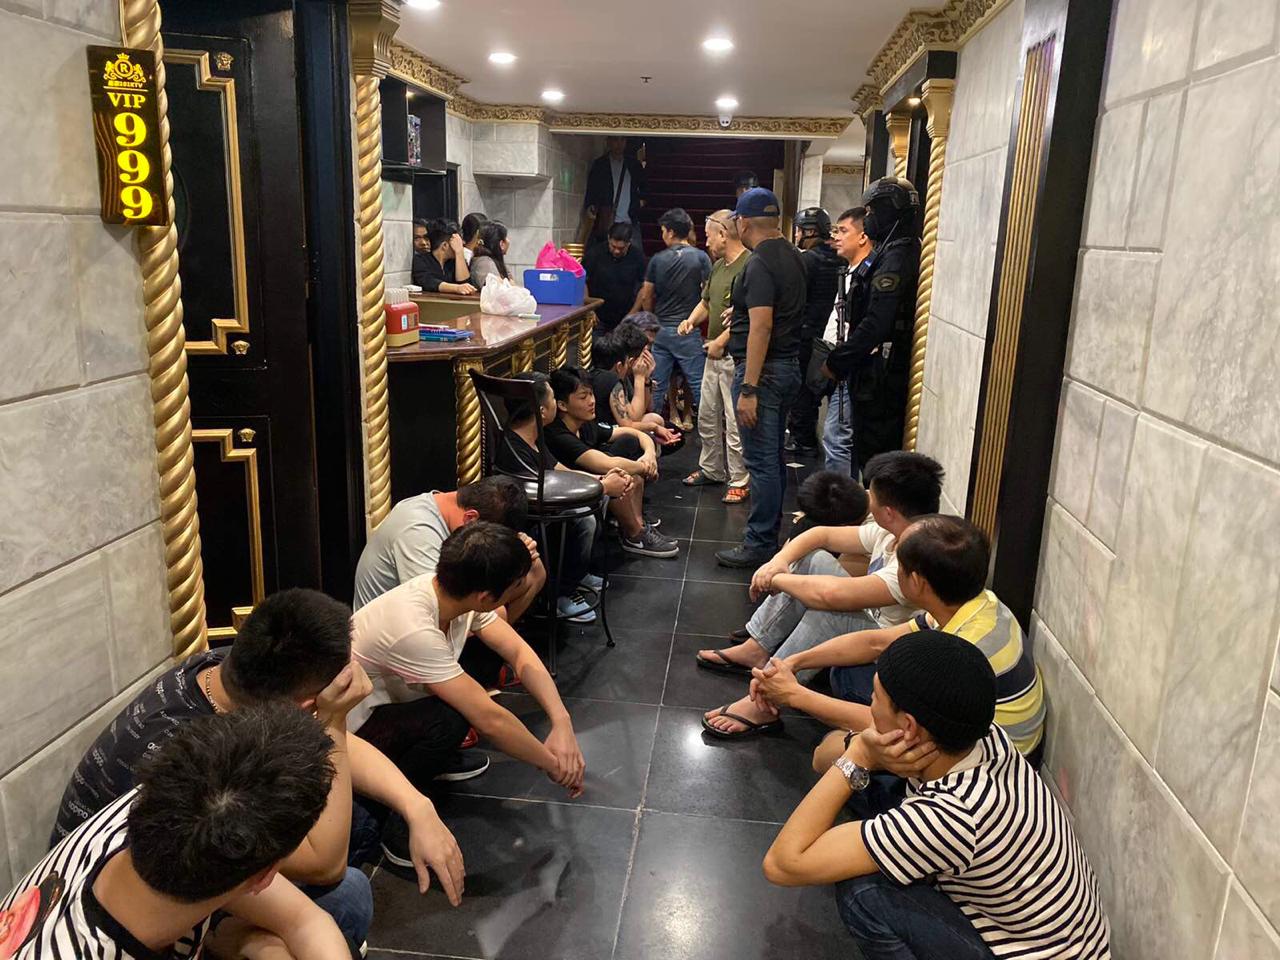 Operatives of the Makati City Police arrest 16 Chinese customers and the owner of an alleged prostitution den in Makati City in a raid launched on Friday, Jan. 10, 2020. (Photo from Makati City Police)